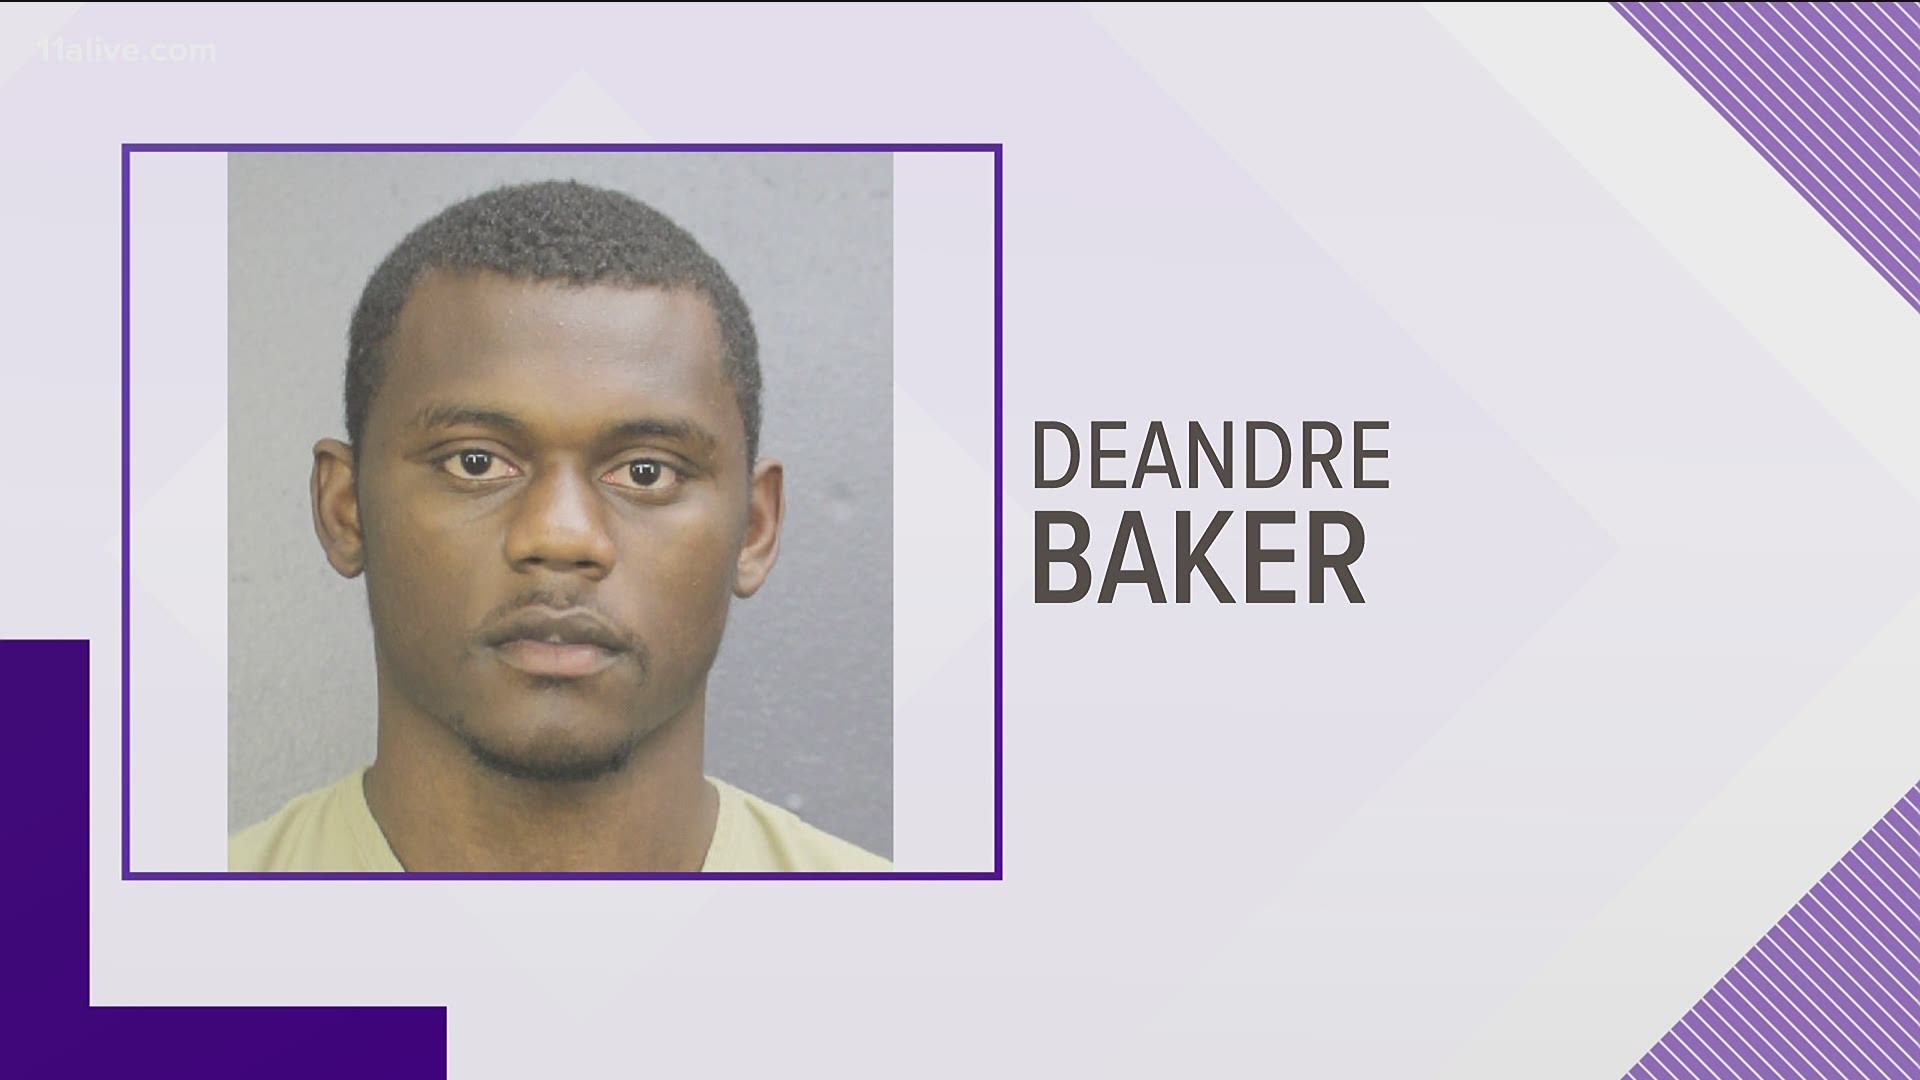 He had been wanted by police after the alleged incident at a Florida party.